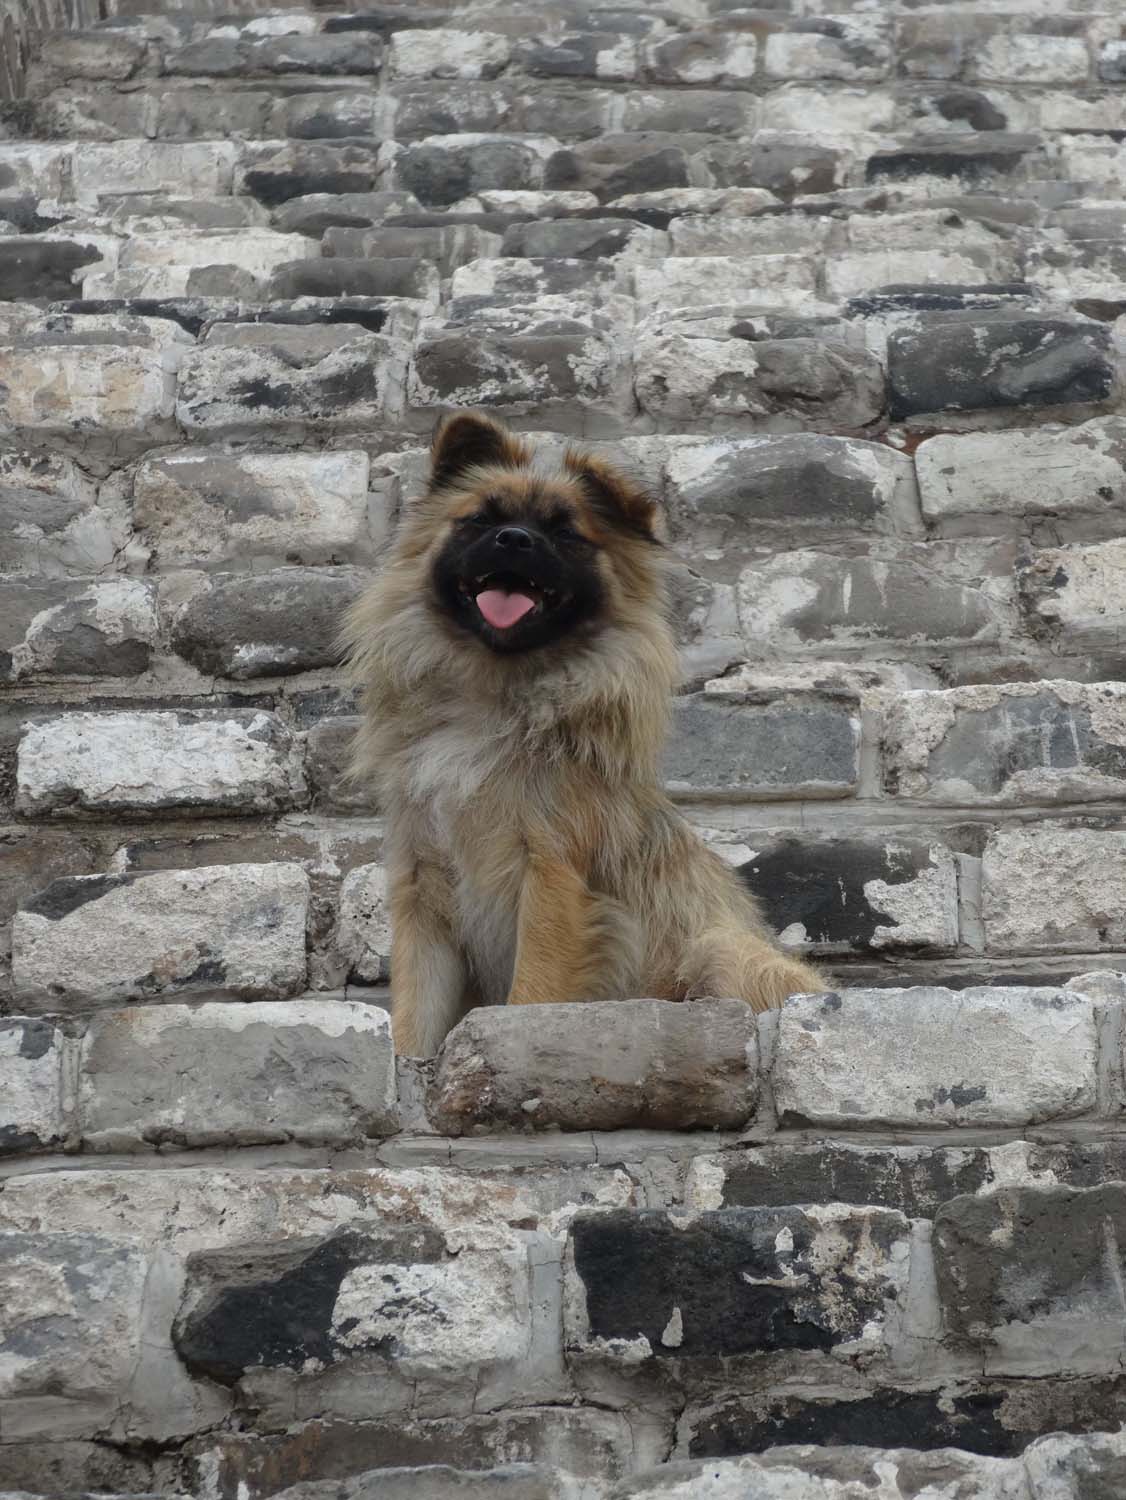 our favourite doggie of the trip: Pupster - walked with us for 2 days!